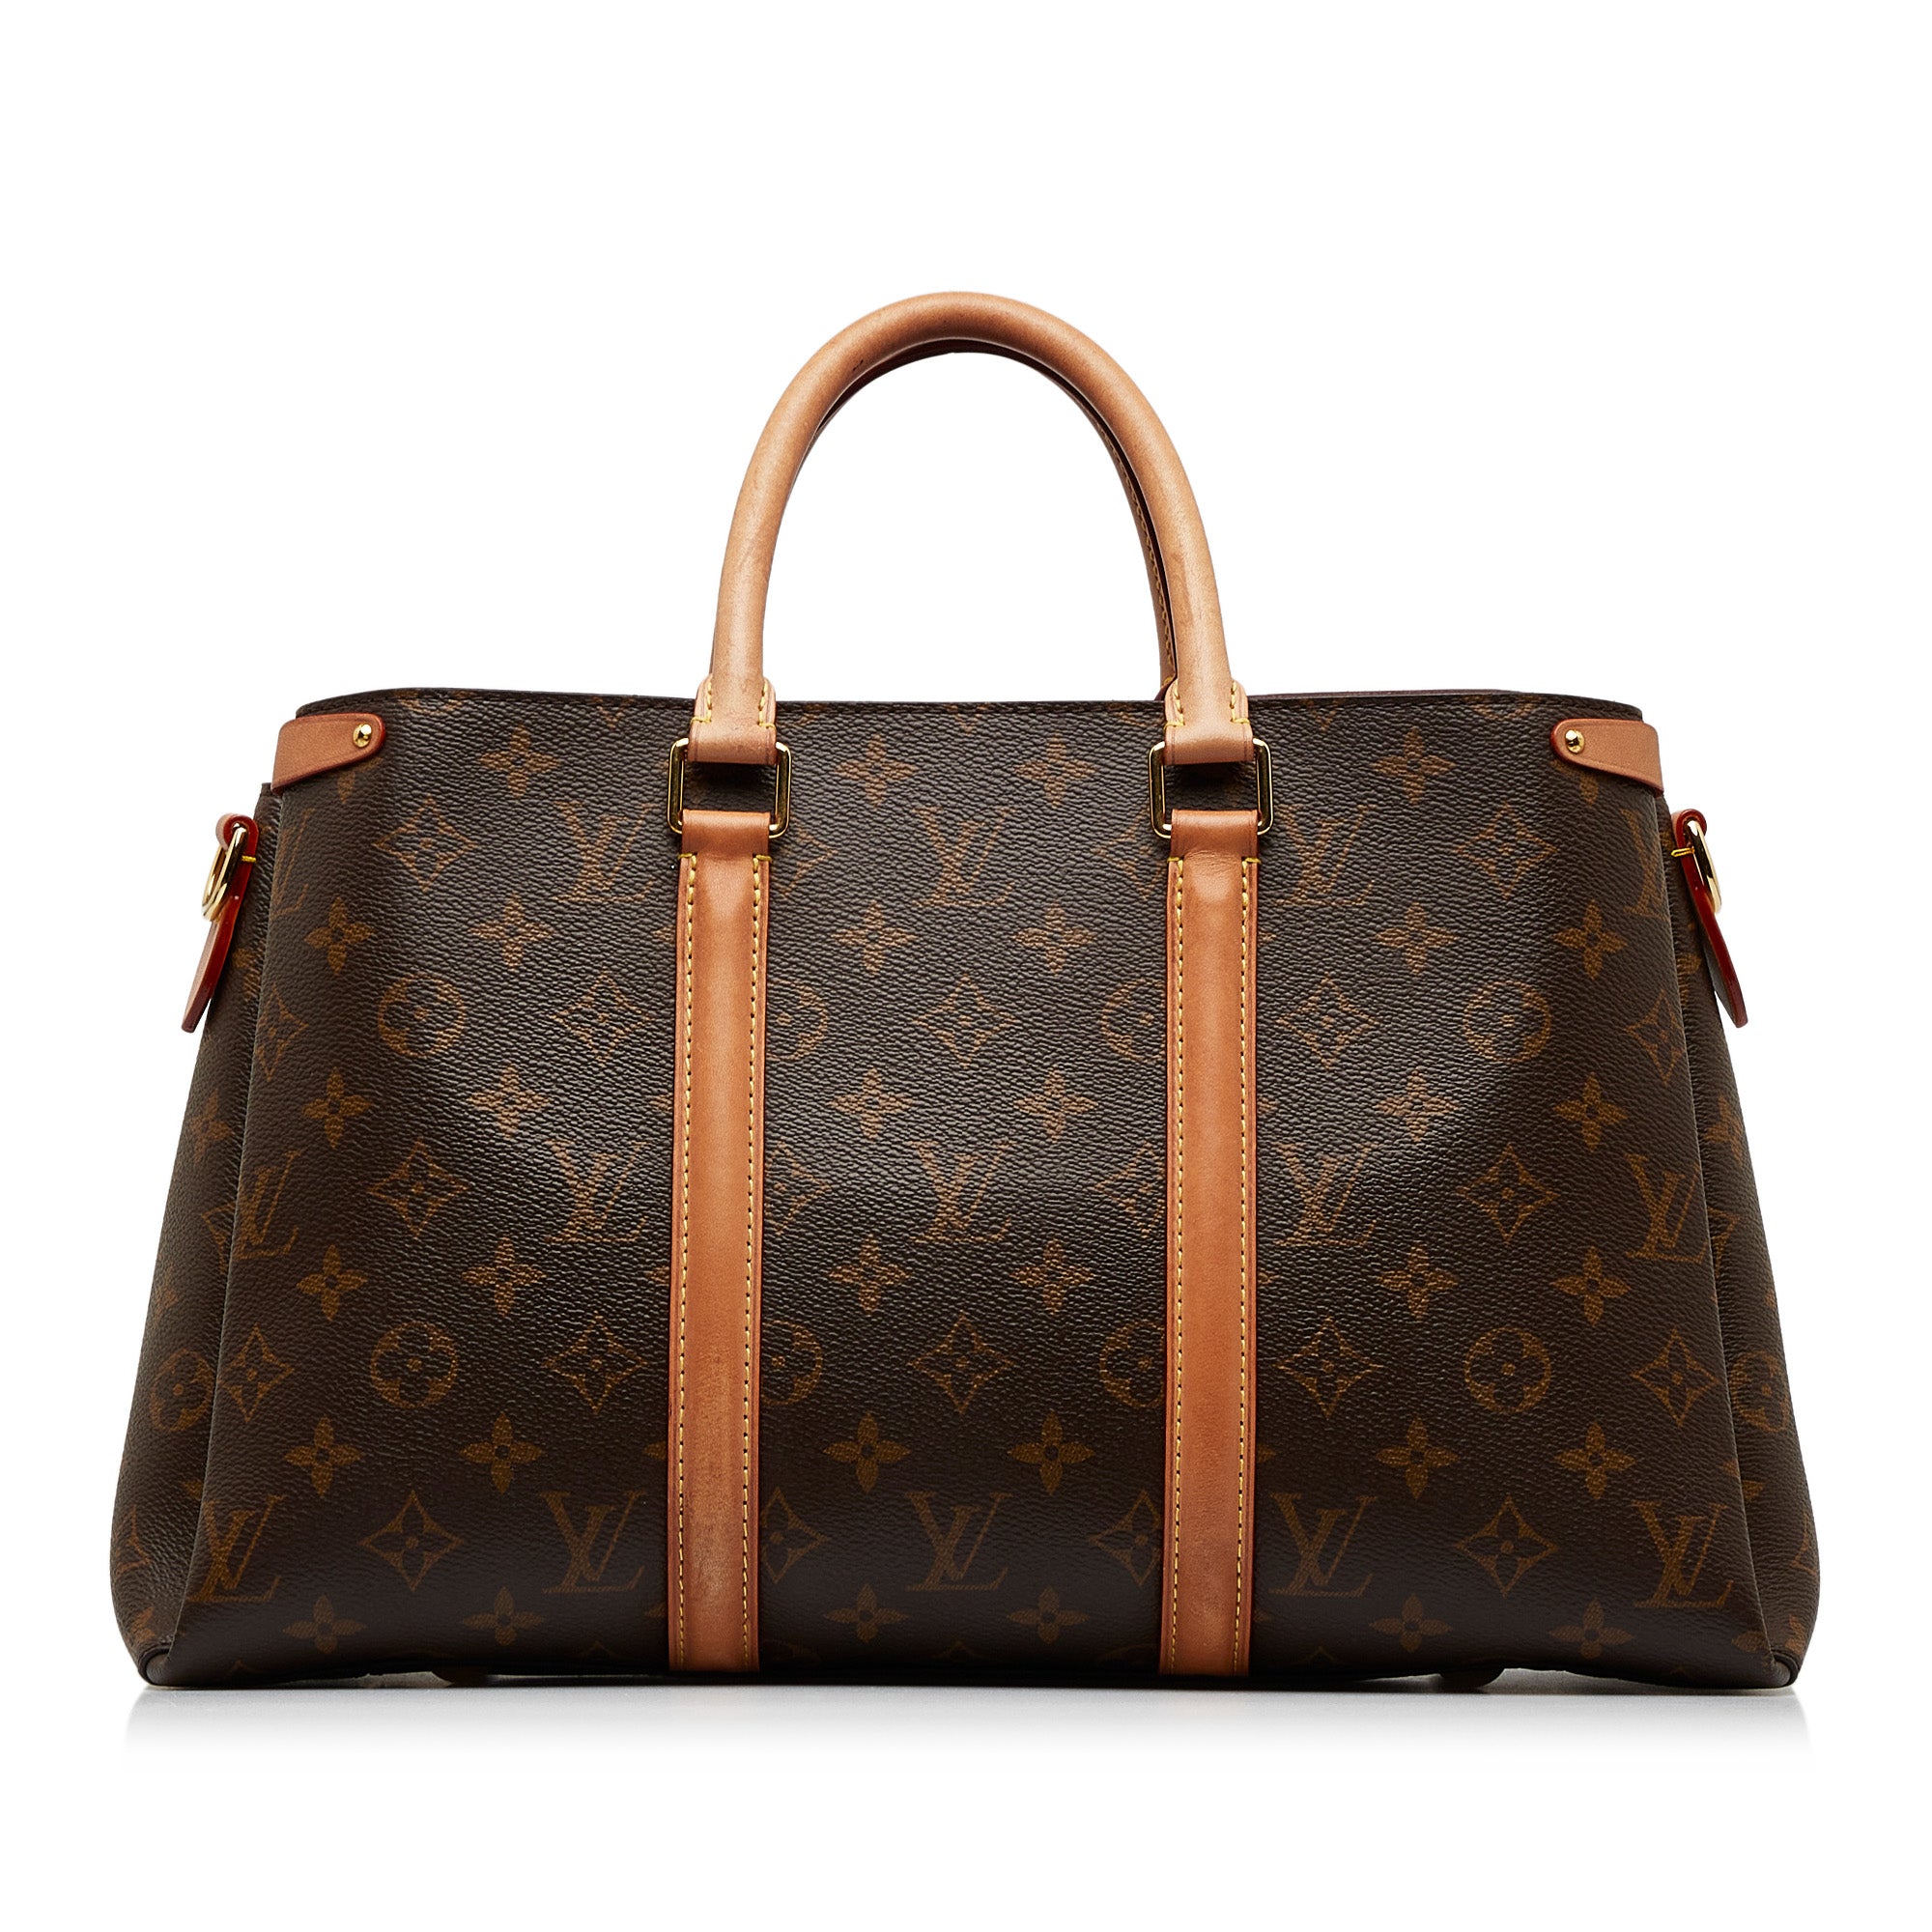 Louis Vuitton - Authenticated Soufflot Handbag - Leather Brown for Women, Very Good Condition